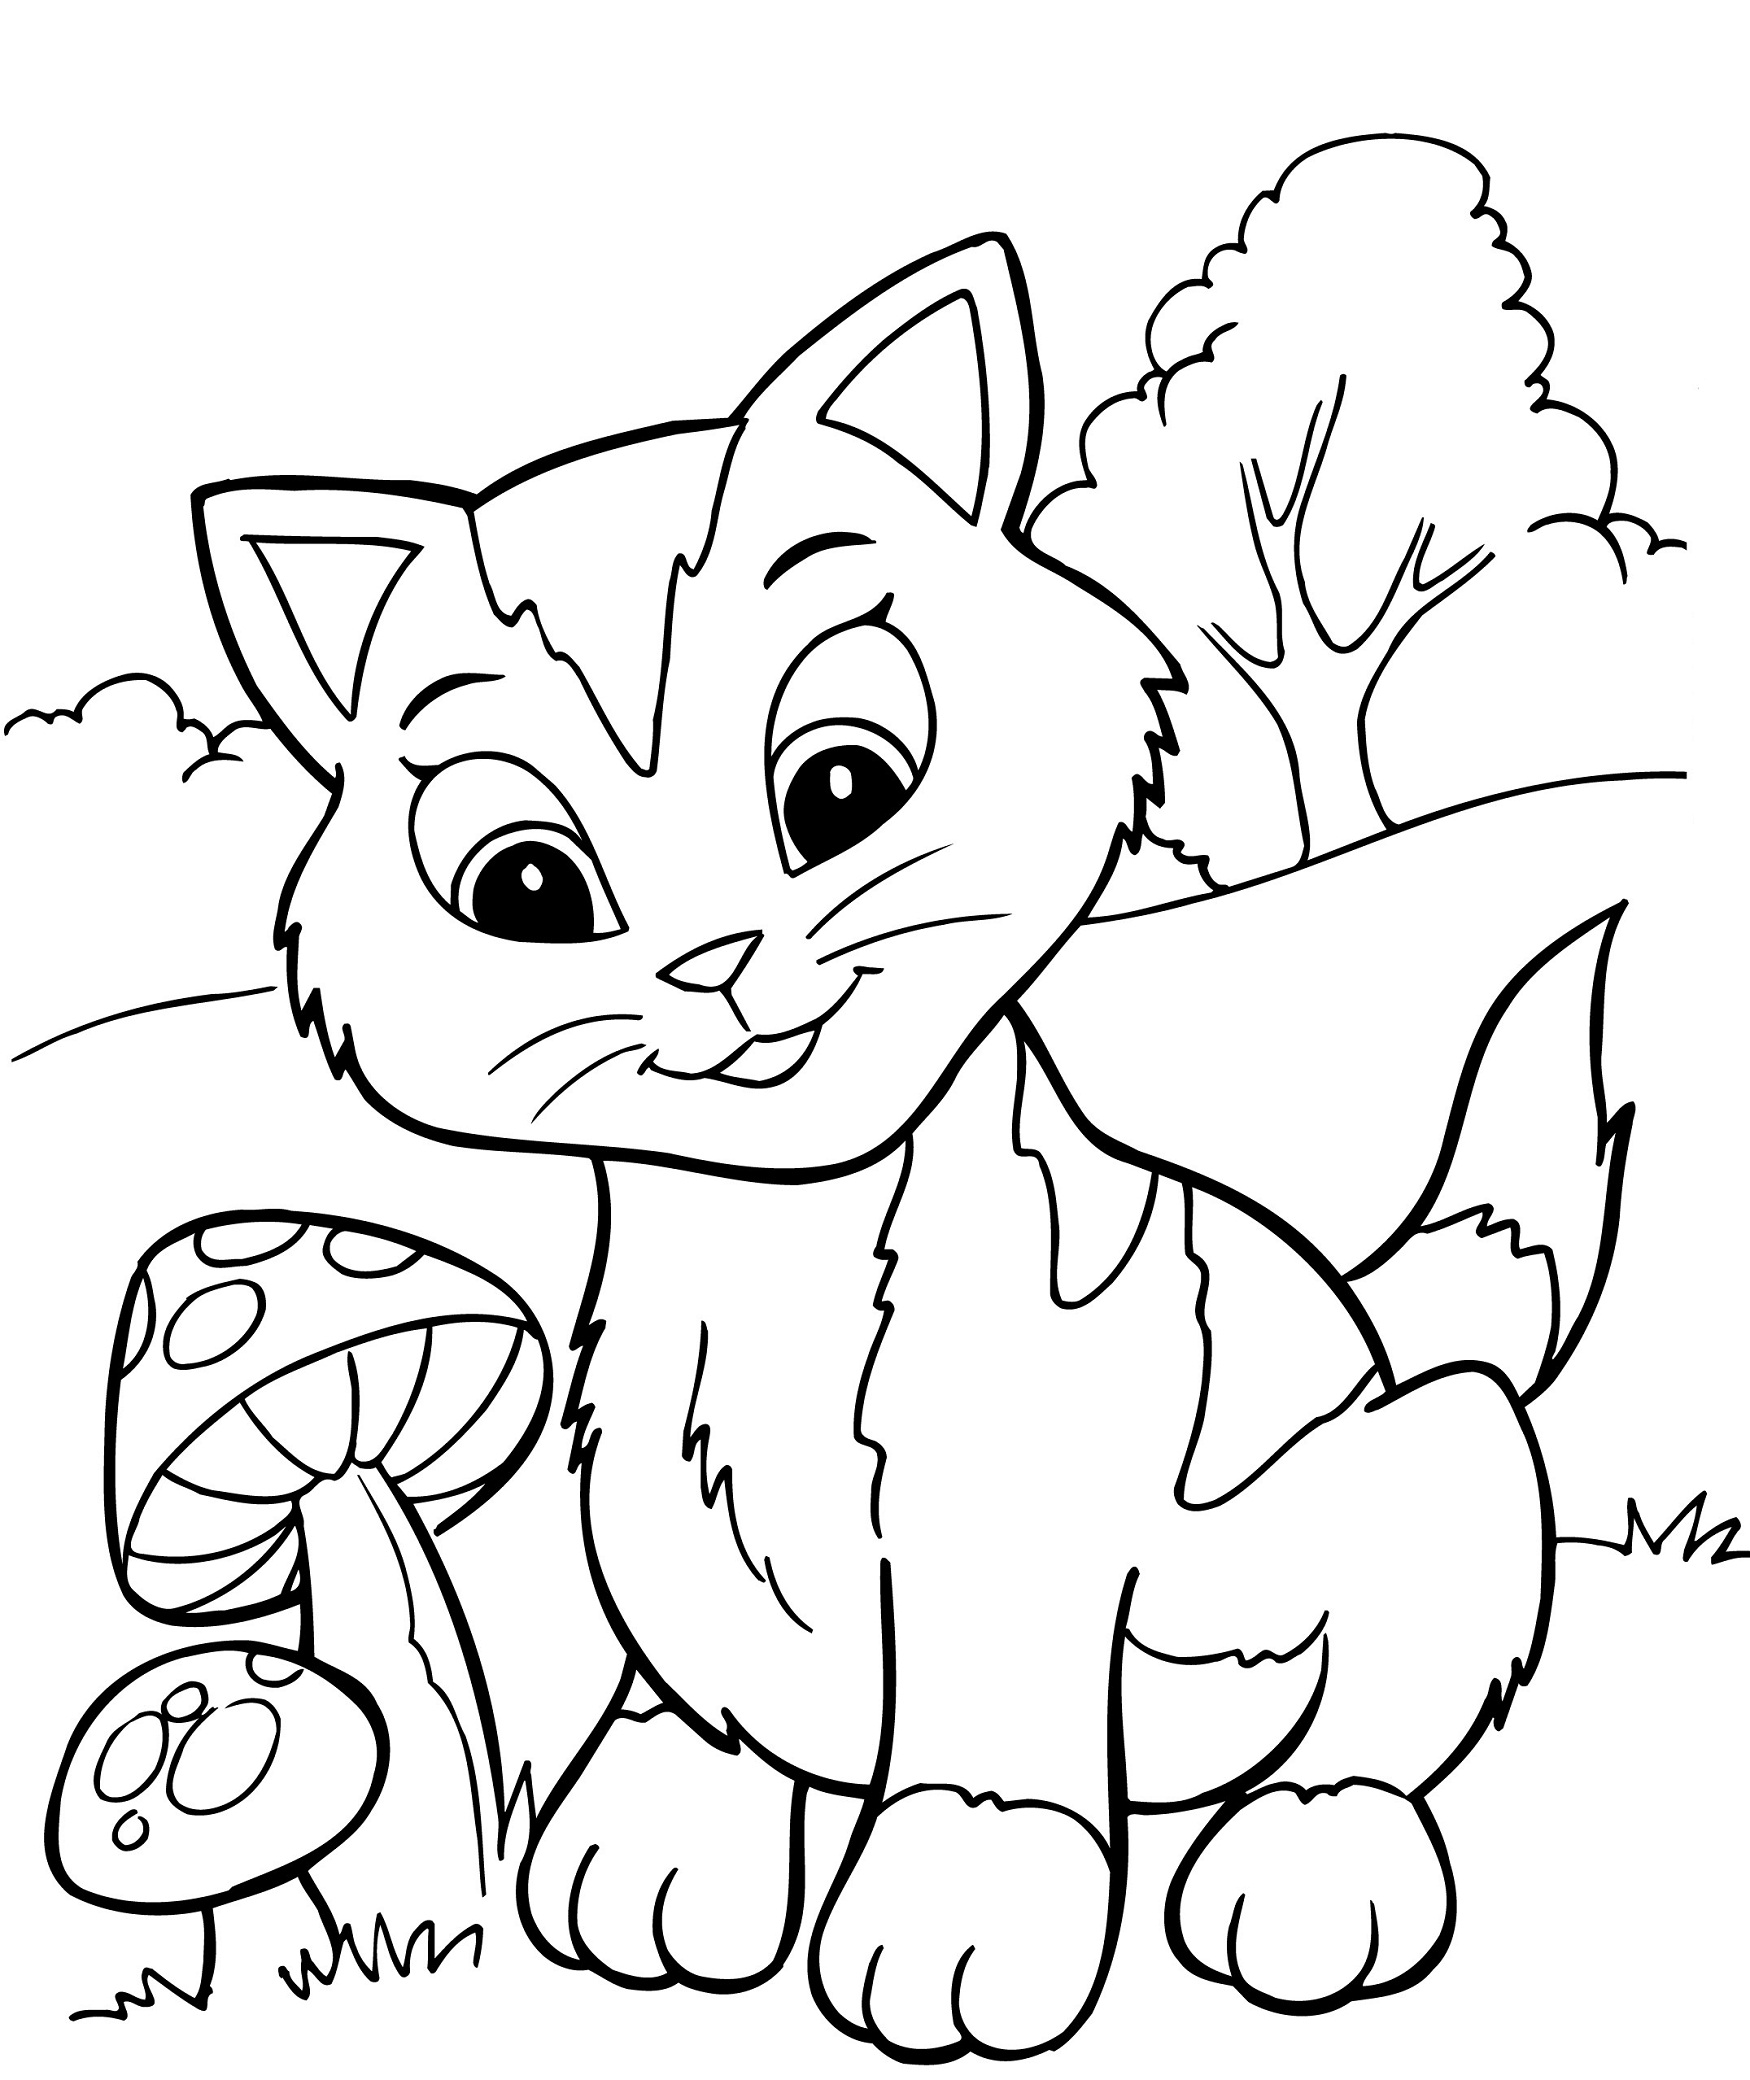 free-printable-elmo-coloring-pages-for-kids-free-printable-kitten